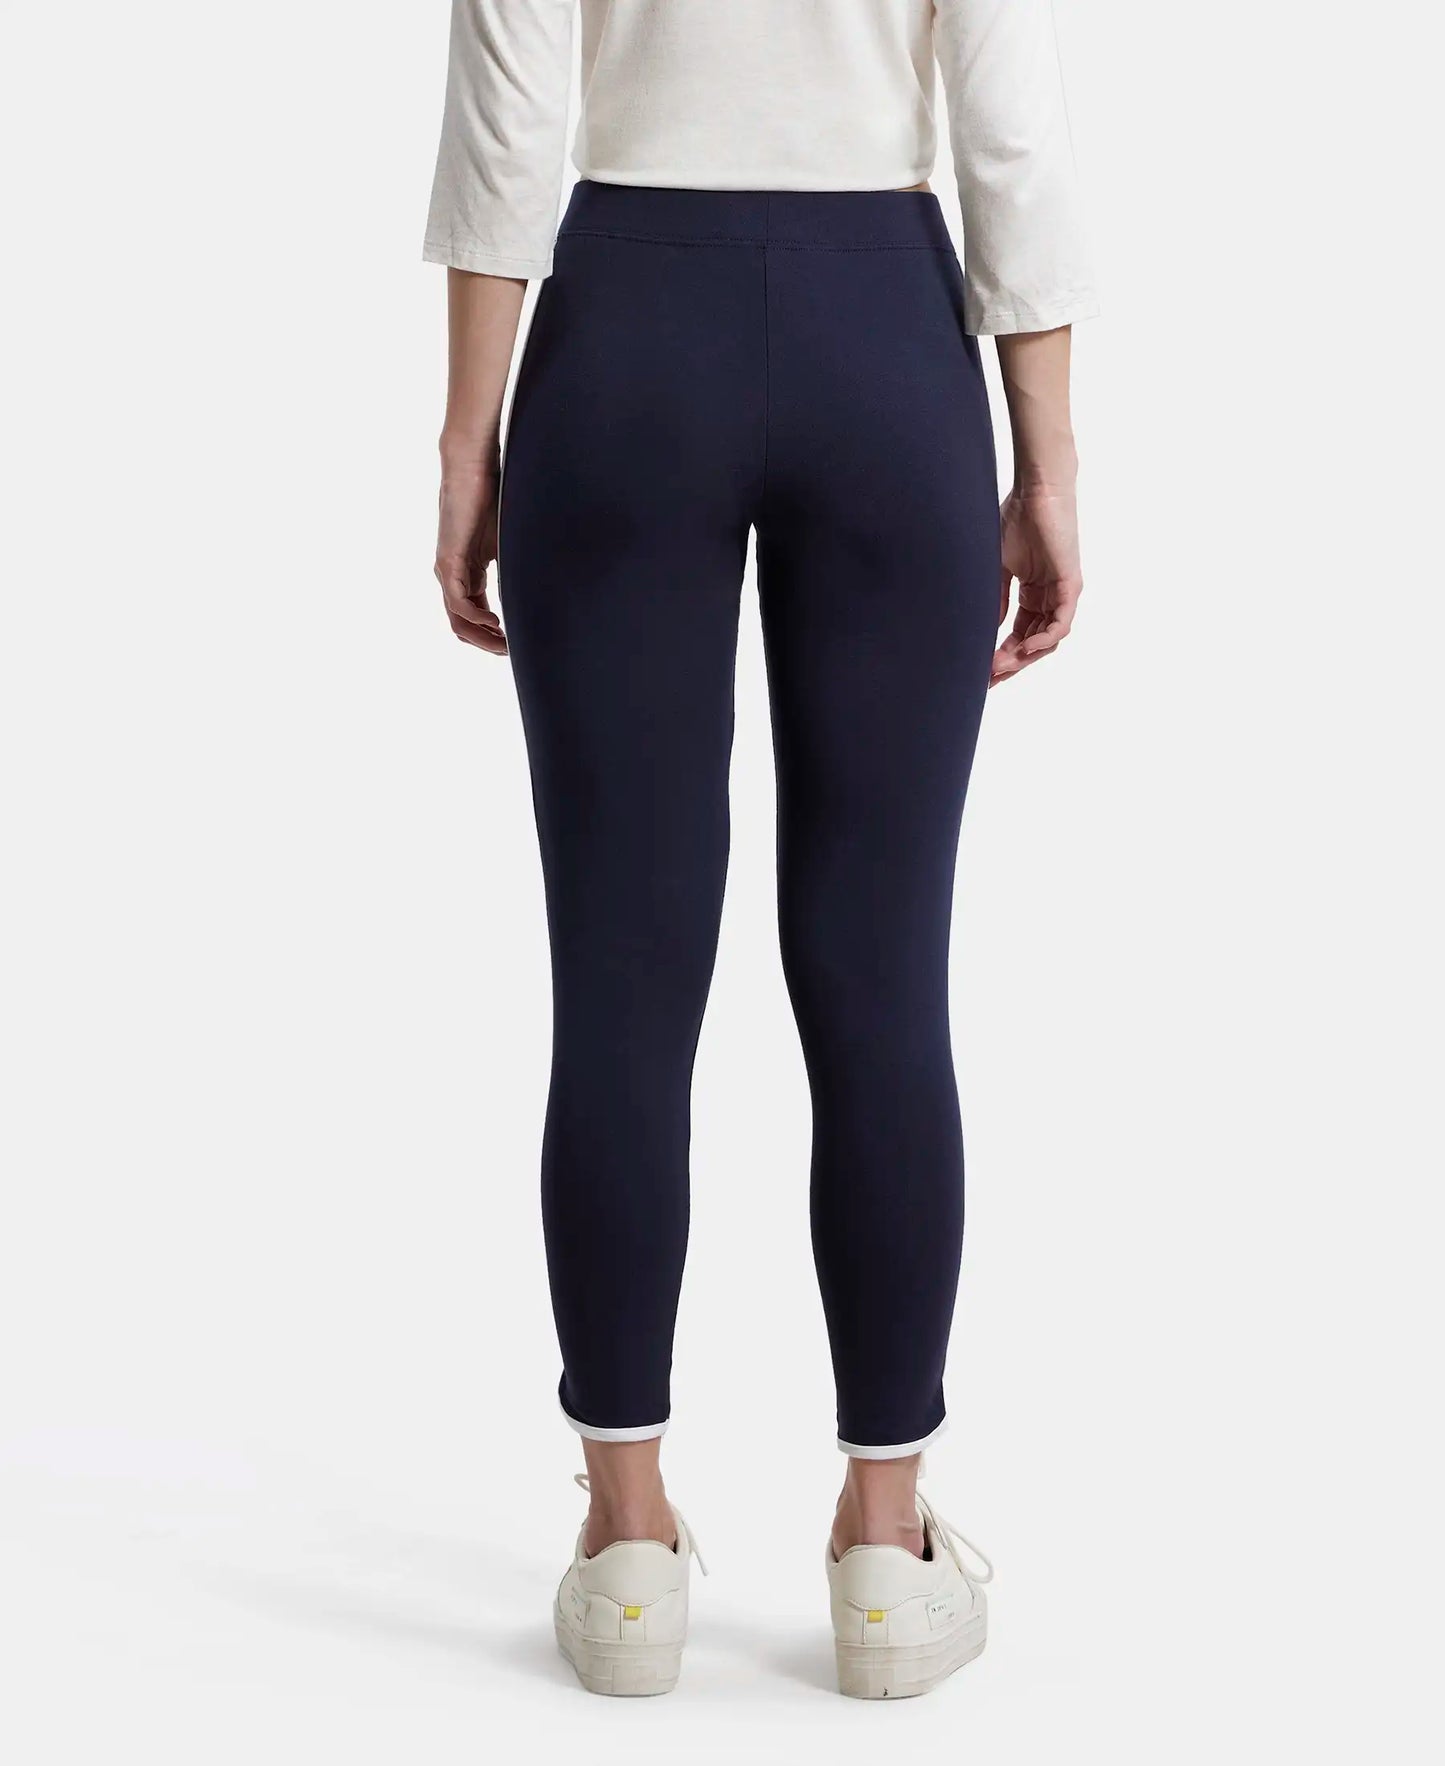 Super Combed Cotton Elastane Leggings with Contrast Side Piping - Navy Blazer-3